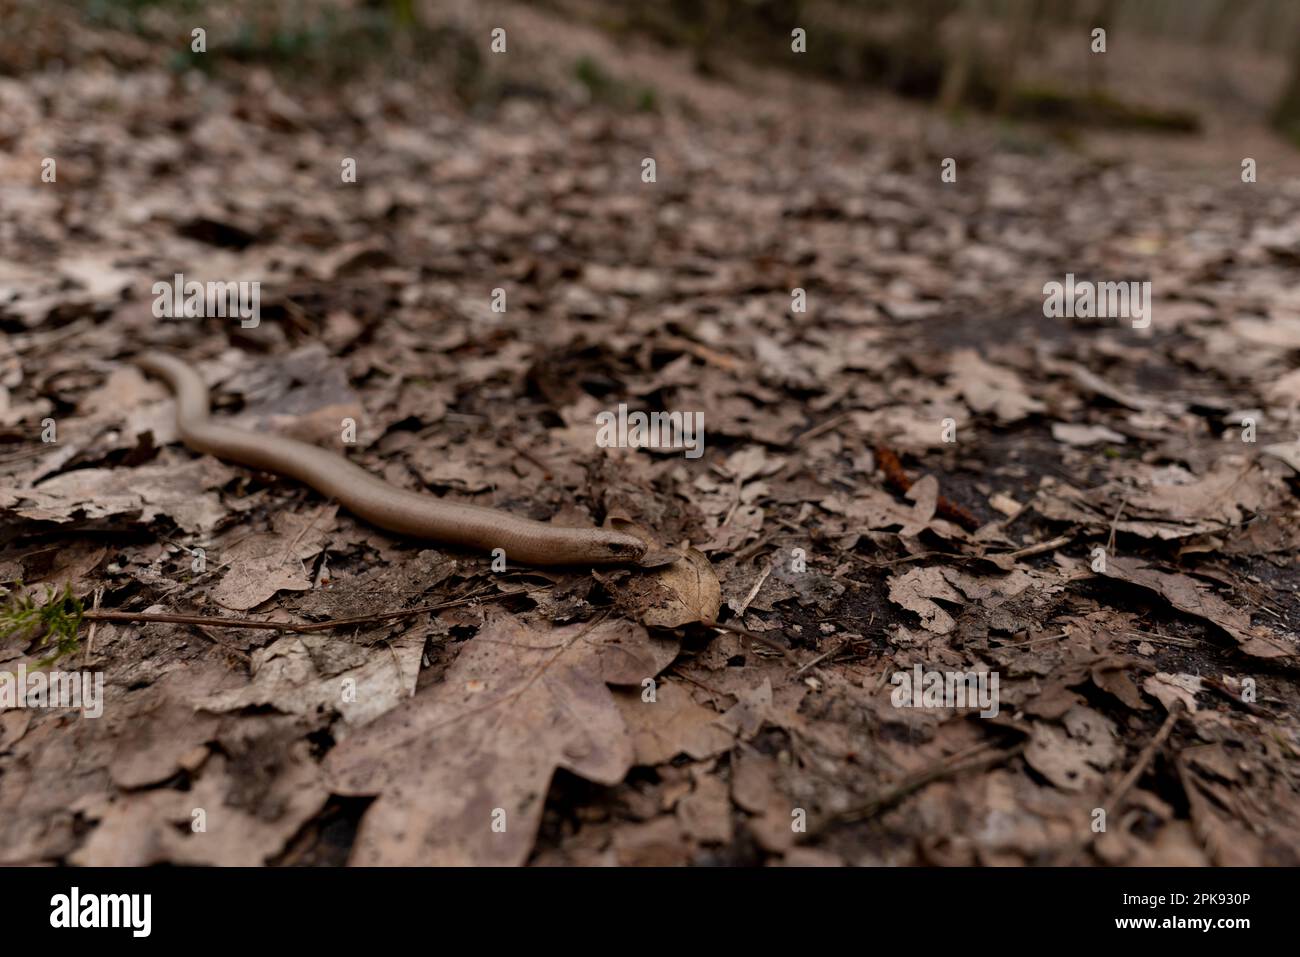 Blindworm on a hiking trail in the forest in spring, shallow depth of field, blurred background Stock Photo